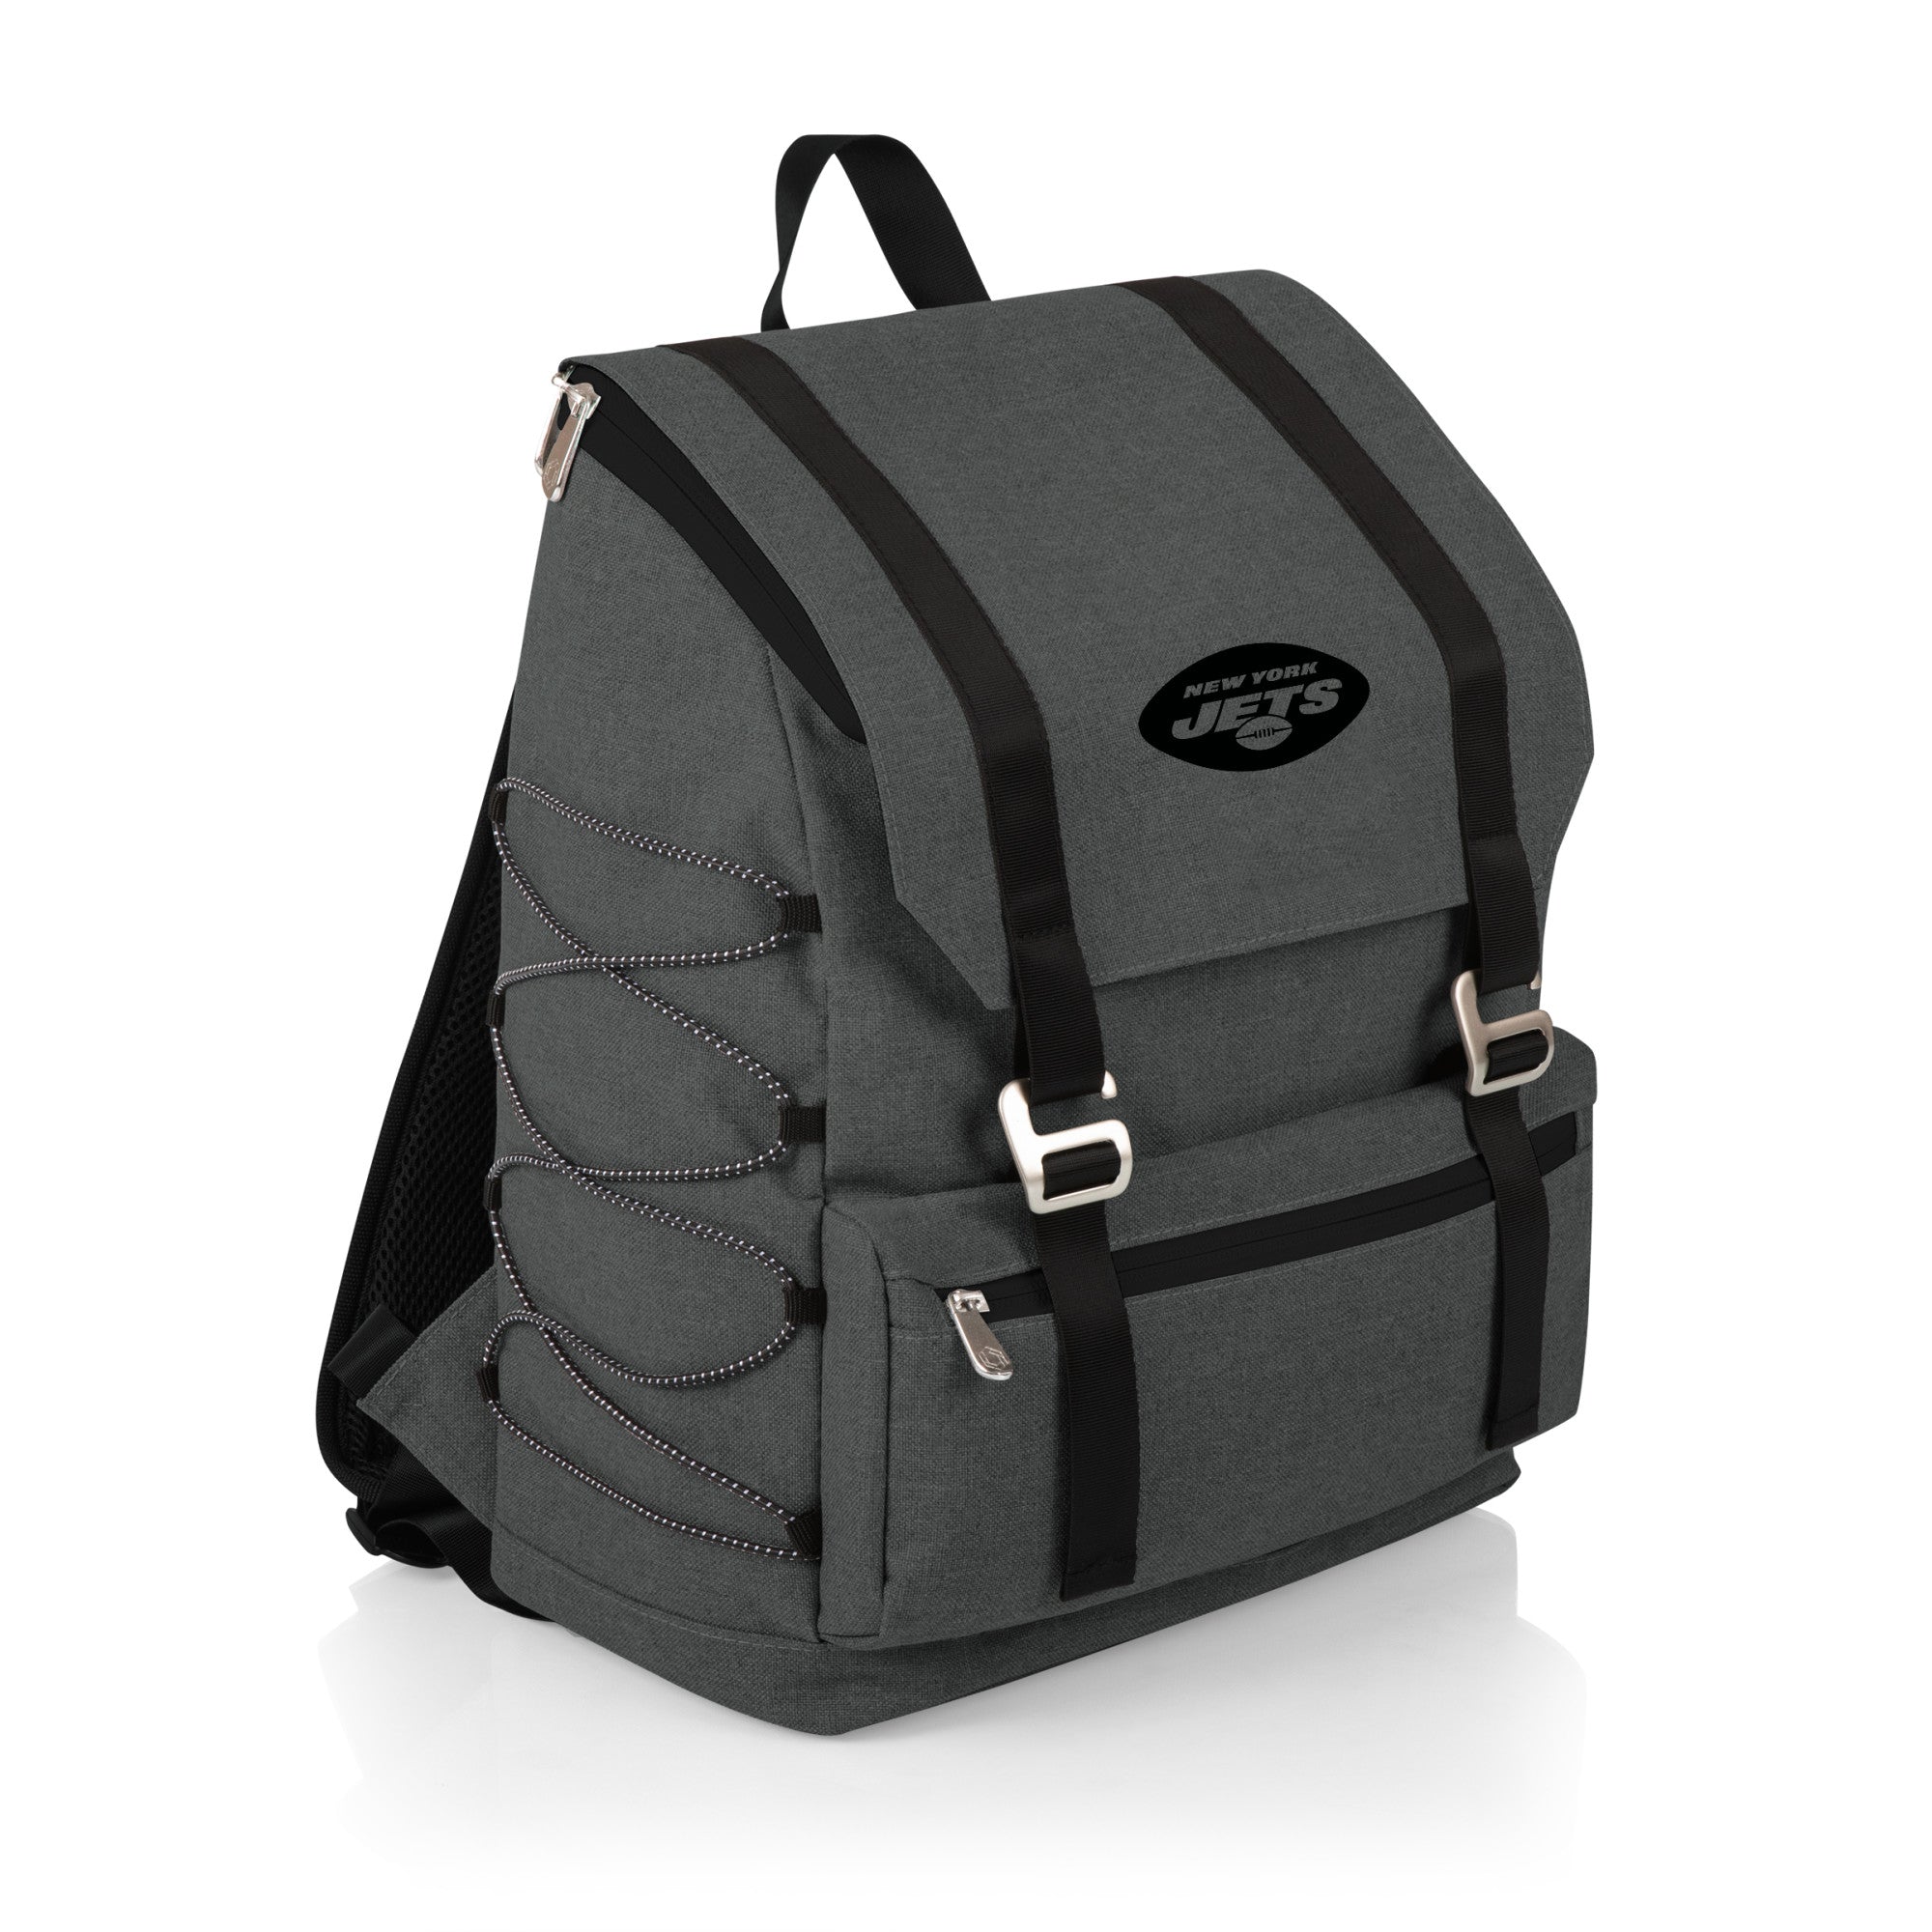 New York Jets - On The Go Traverse Backpack Cooler